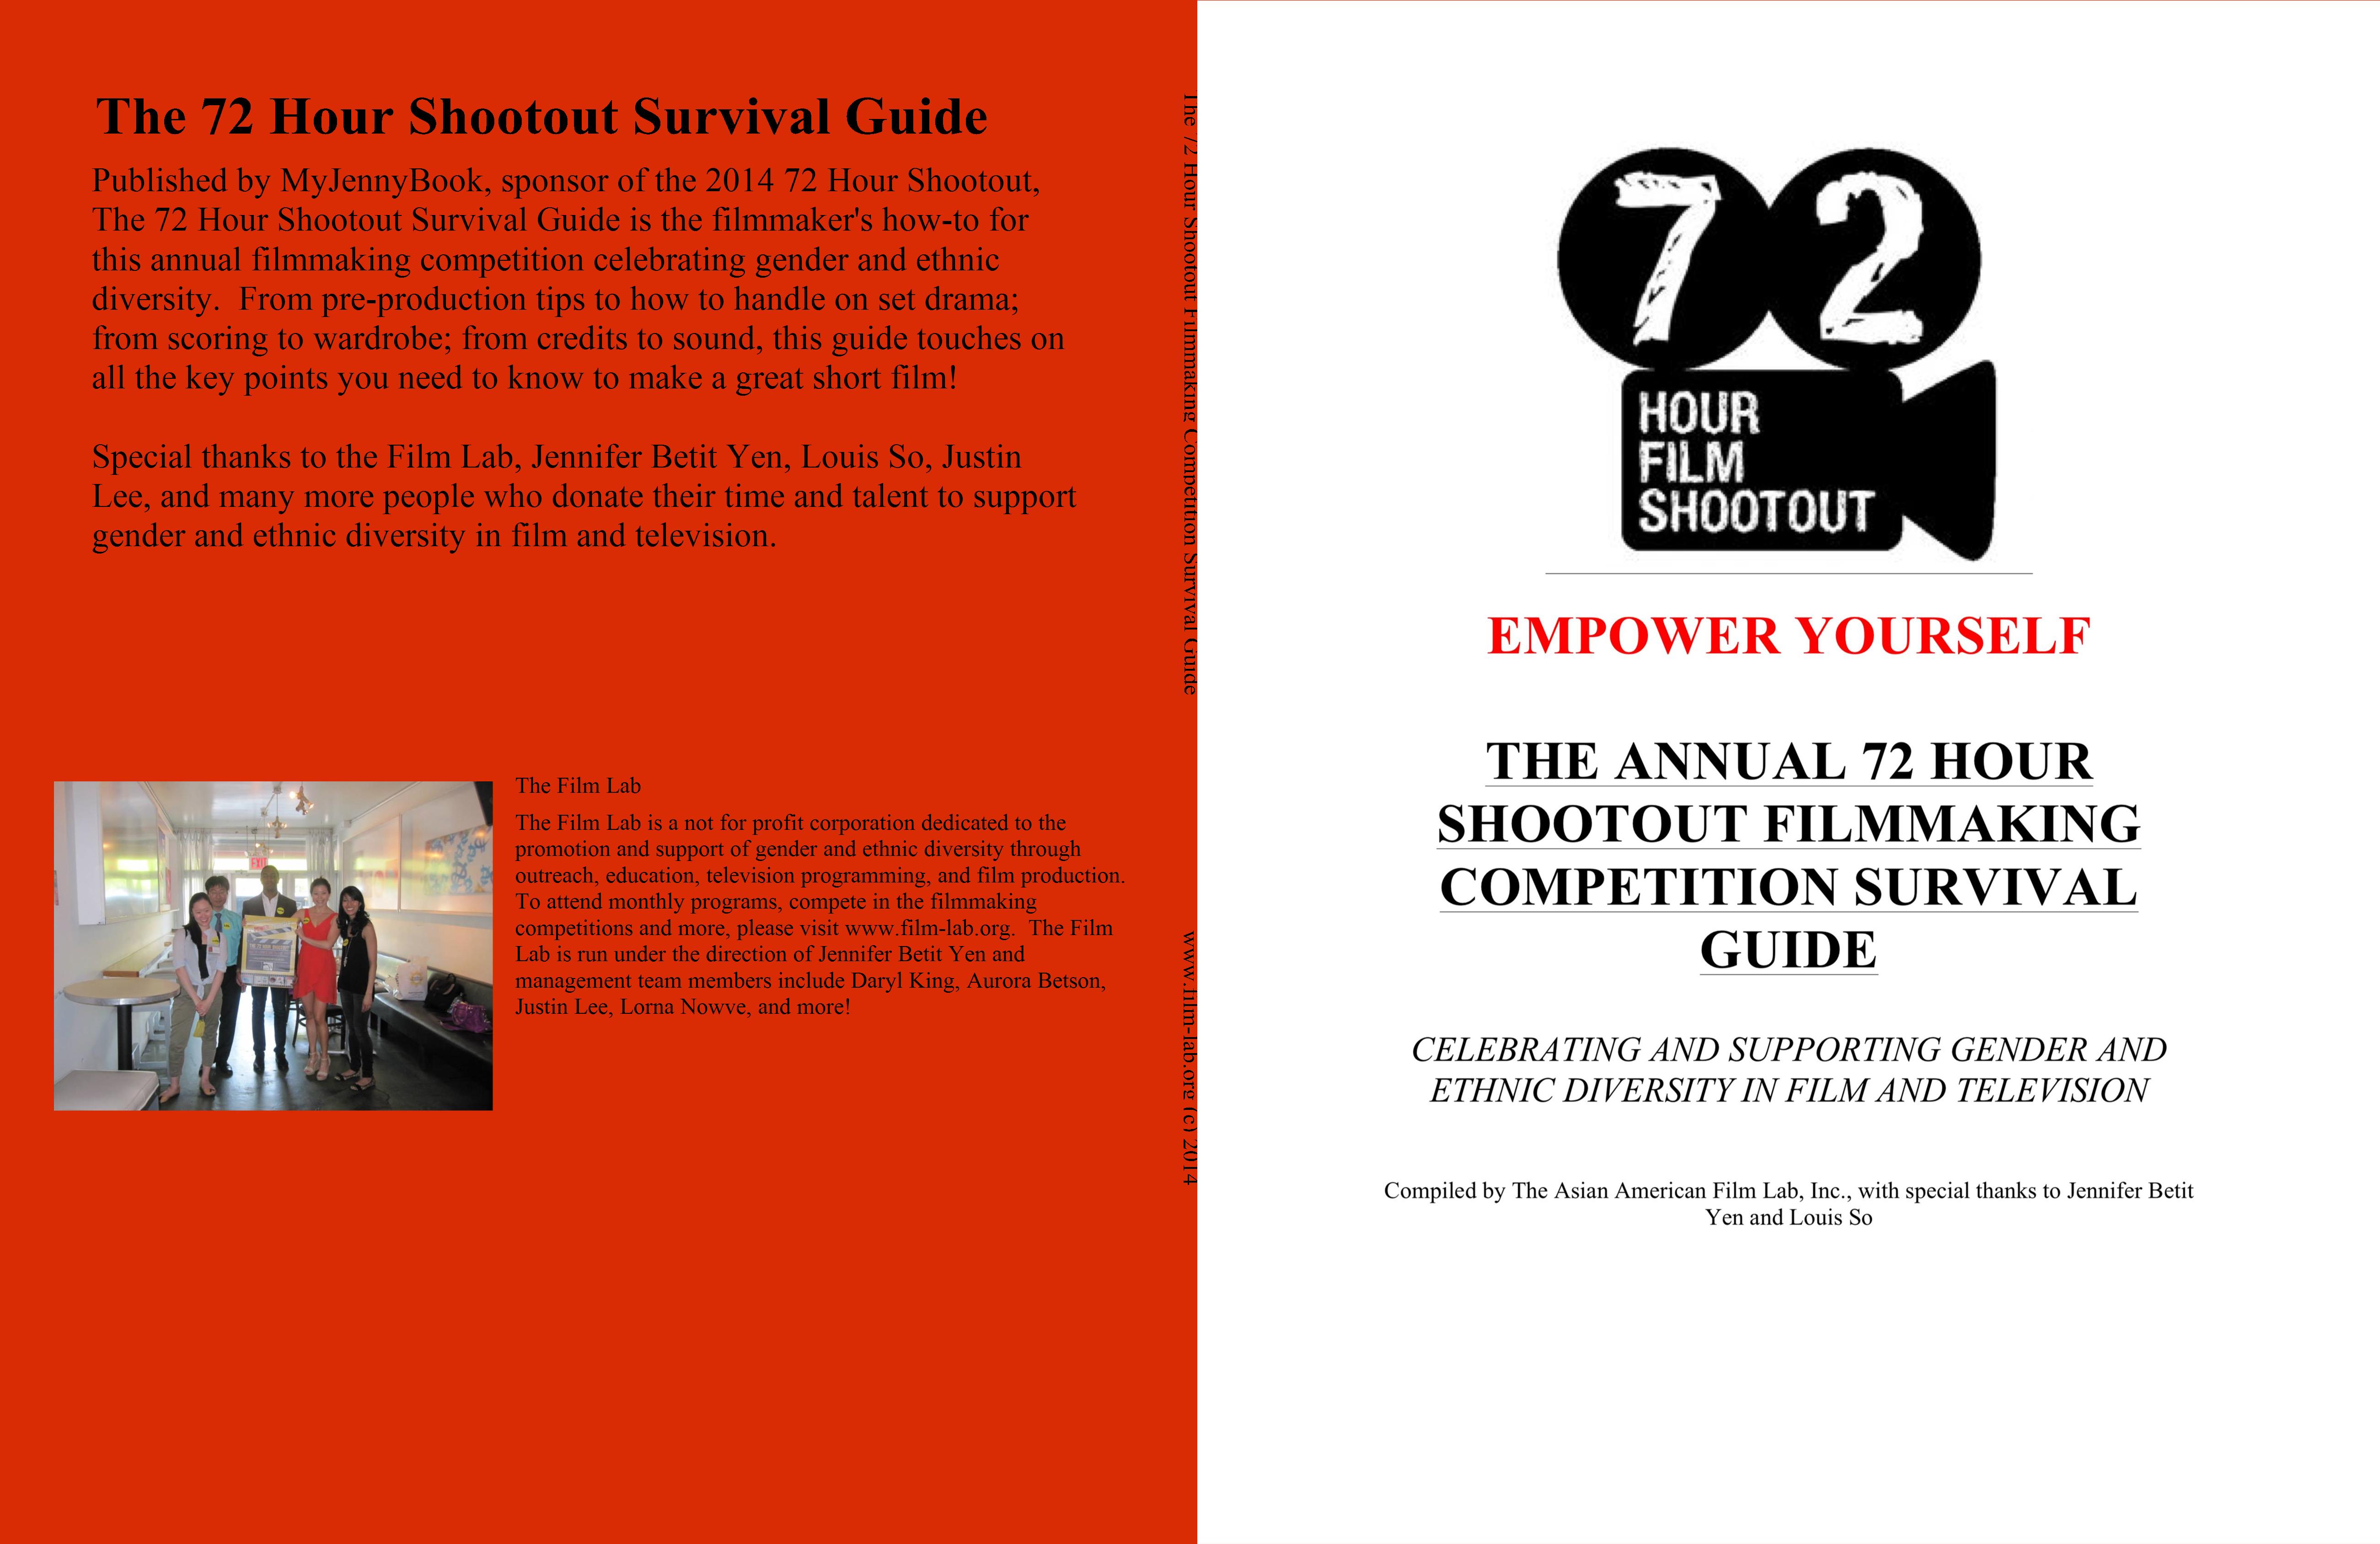 The 72 Hour Shootout Filmmaking Competition Survival Guide cover image